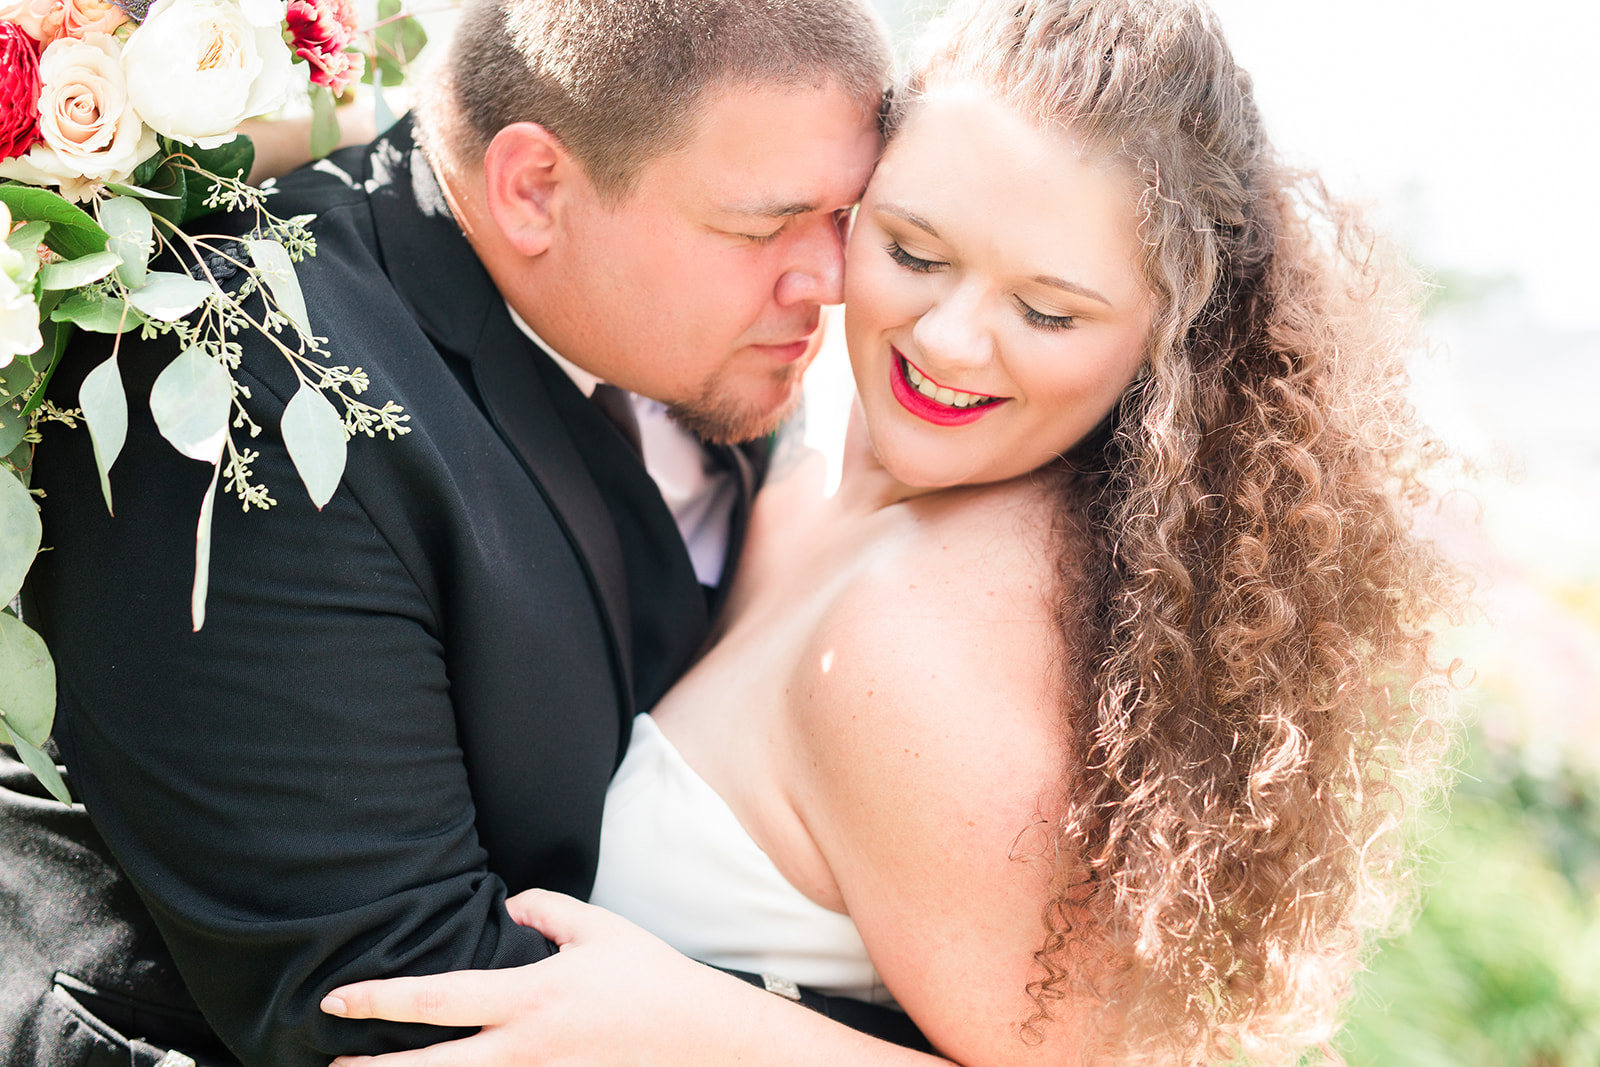 Bride and groom hugging and smiling